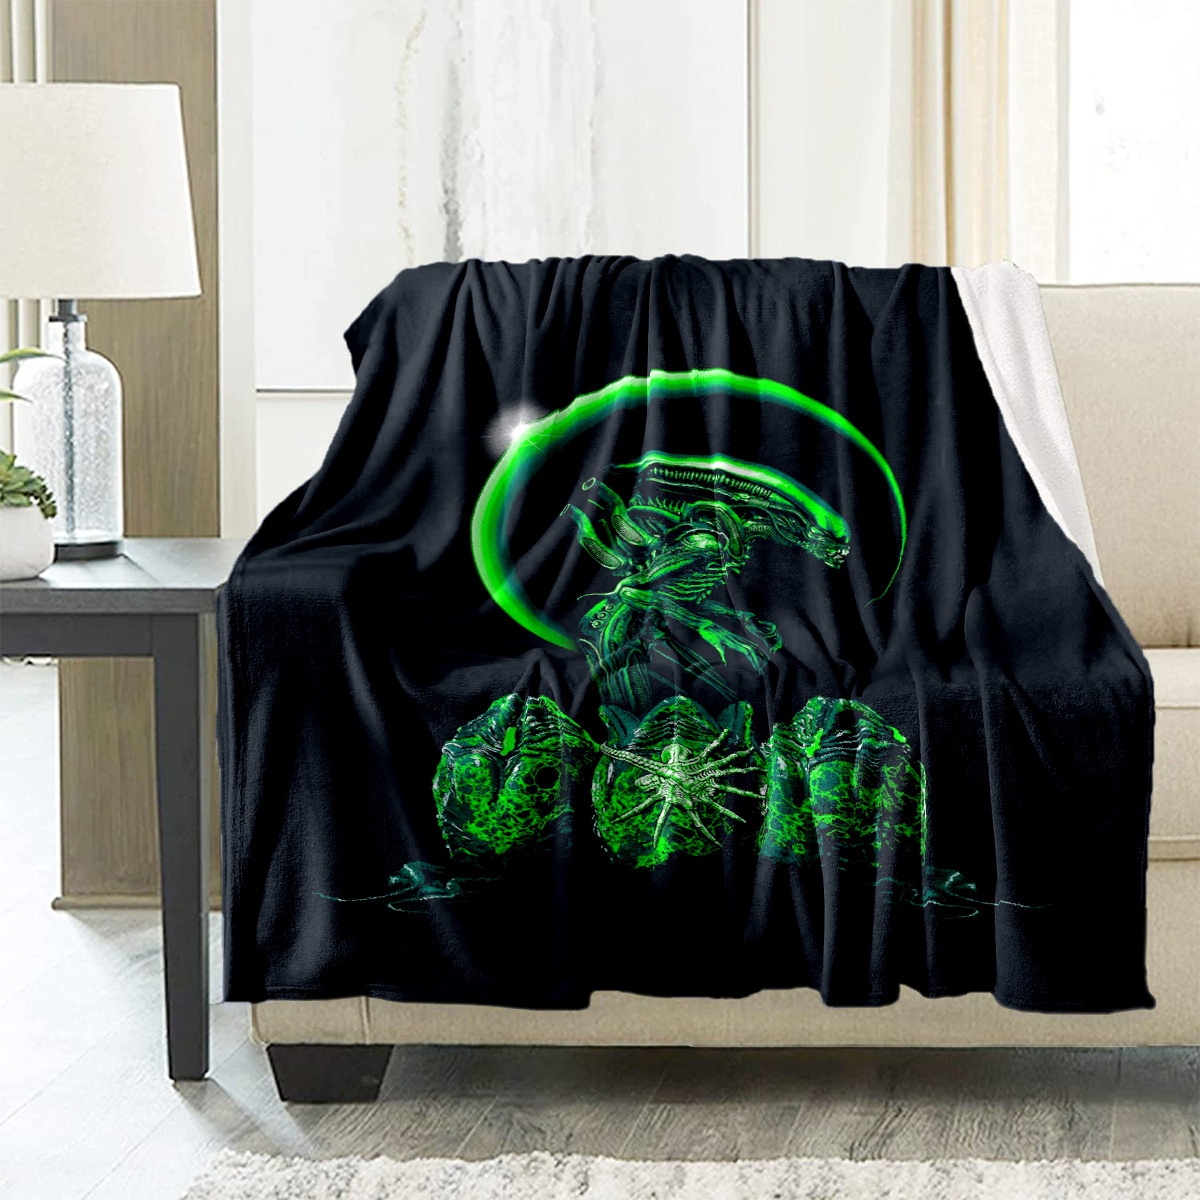 

Alien Polyester Fleece Blanket, 100% Soft Cozy Warm Throw For Chair, Office, Bed, Sofa, Travel, Camping - Large Size, Machine Washable